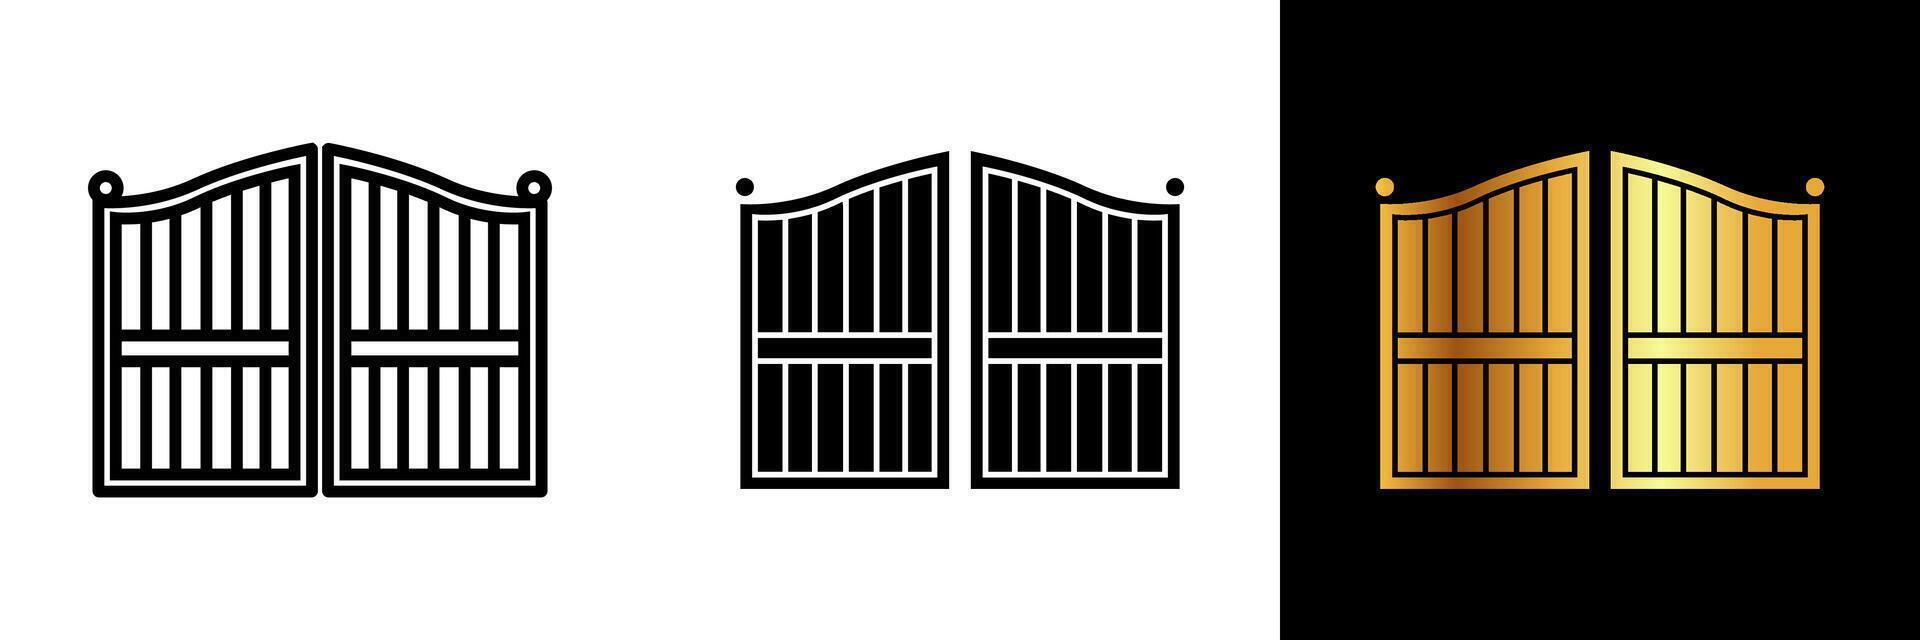 The Gate icon symbolizes entrance, passage, and the concept of transition in a single visual element. vector